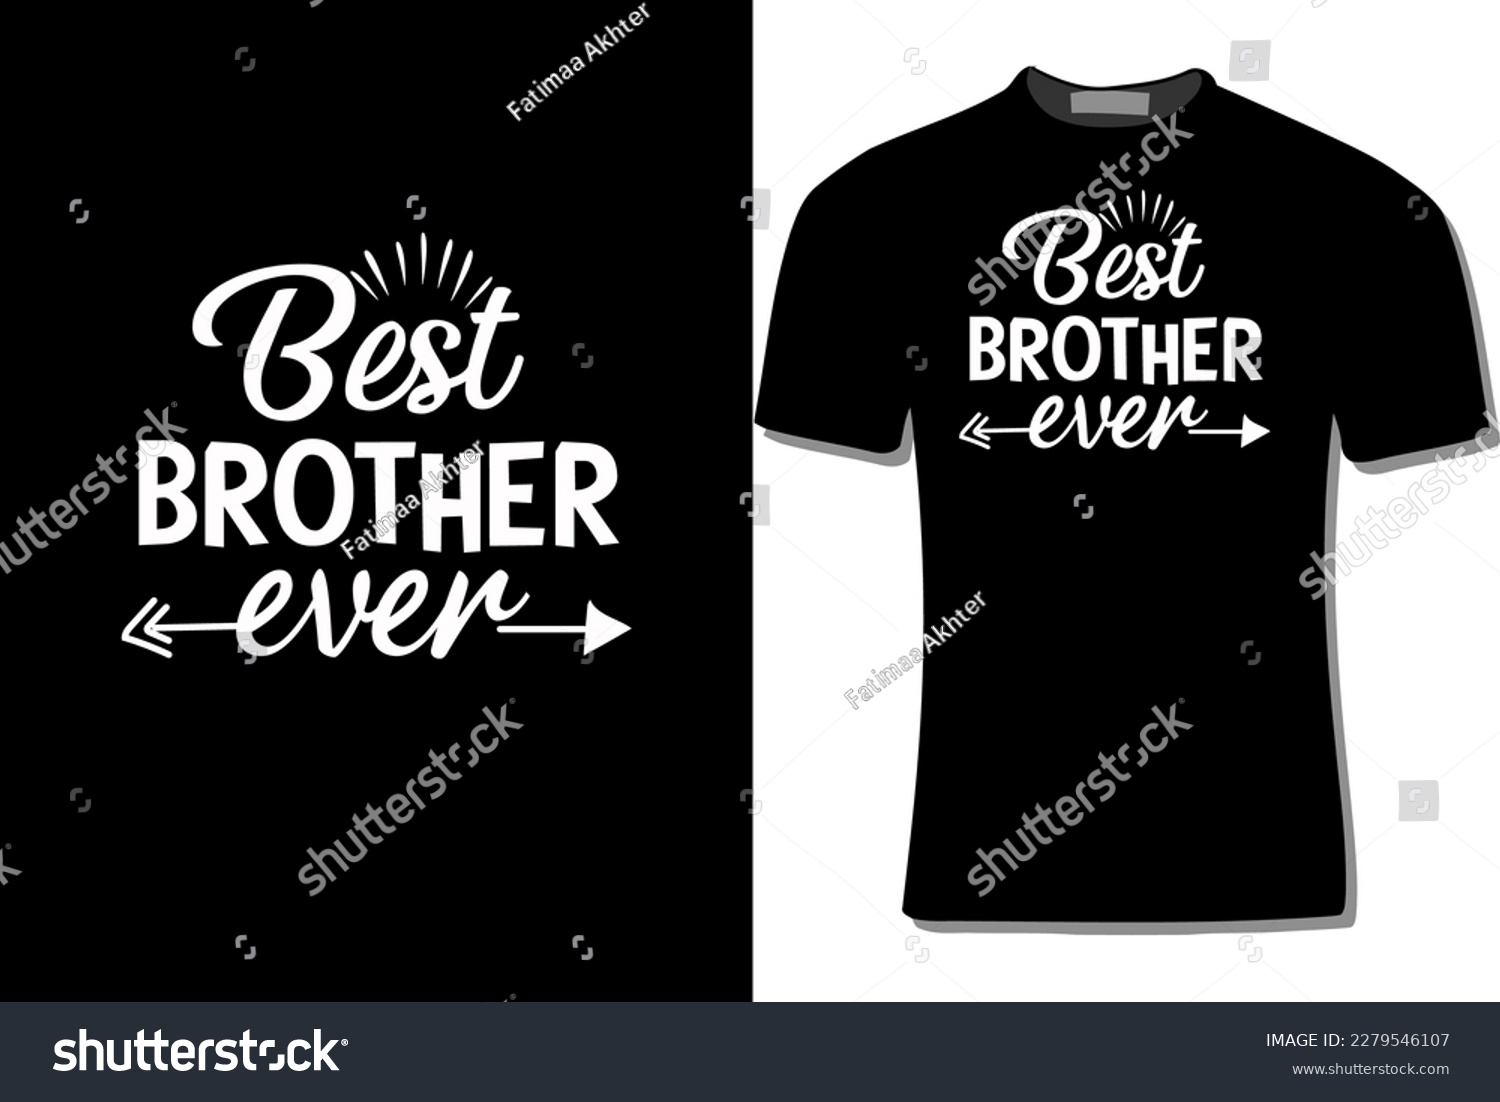 SVG of Best Little Brother Ever T-Shirt Design For Print, Poster, Card, Mugs, Bags, Invitation, And Party. svg